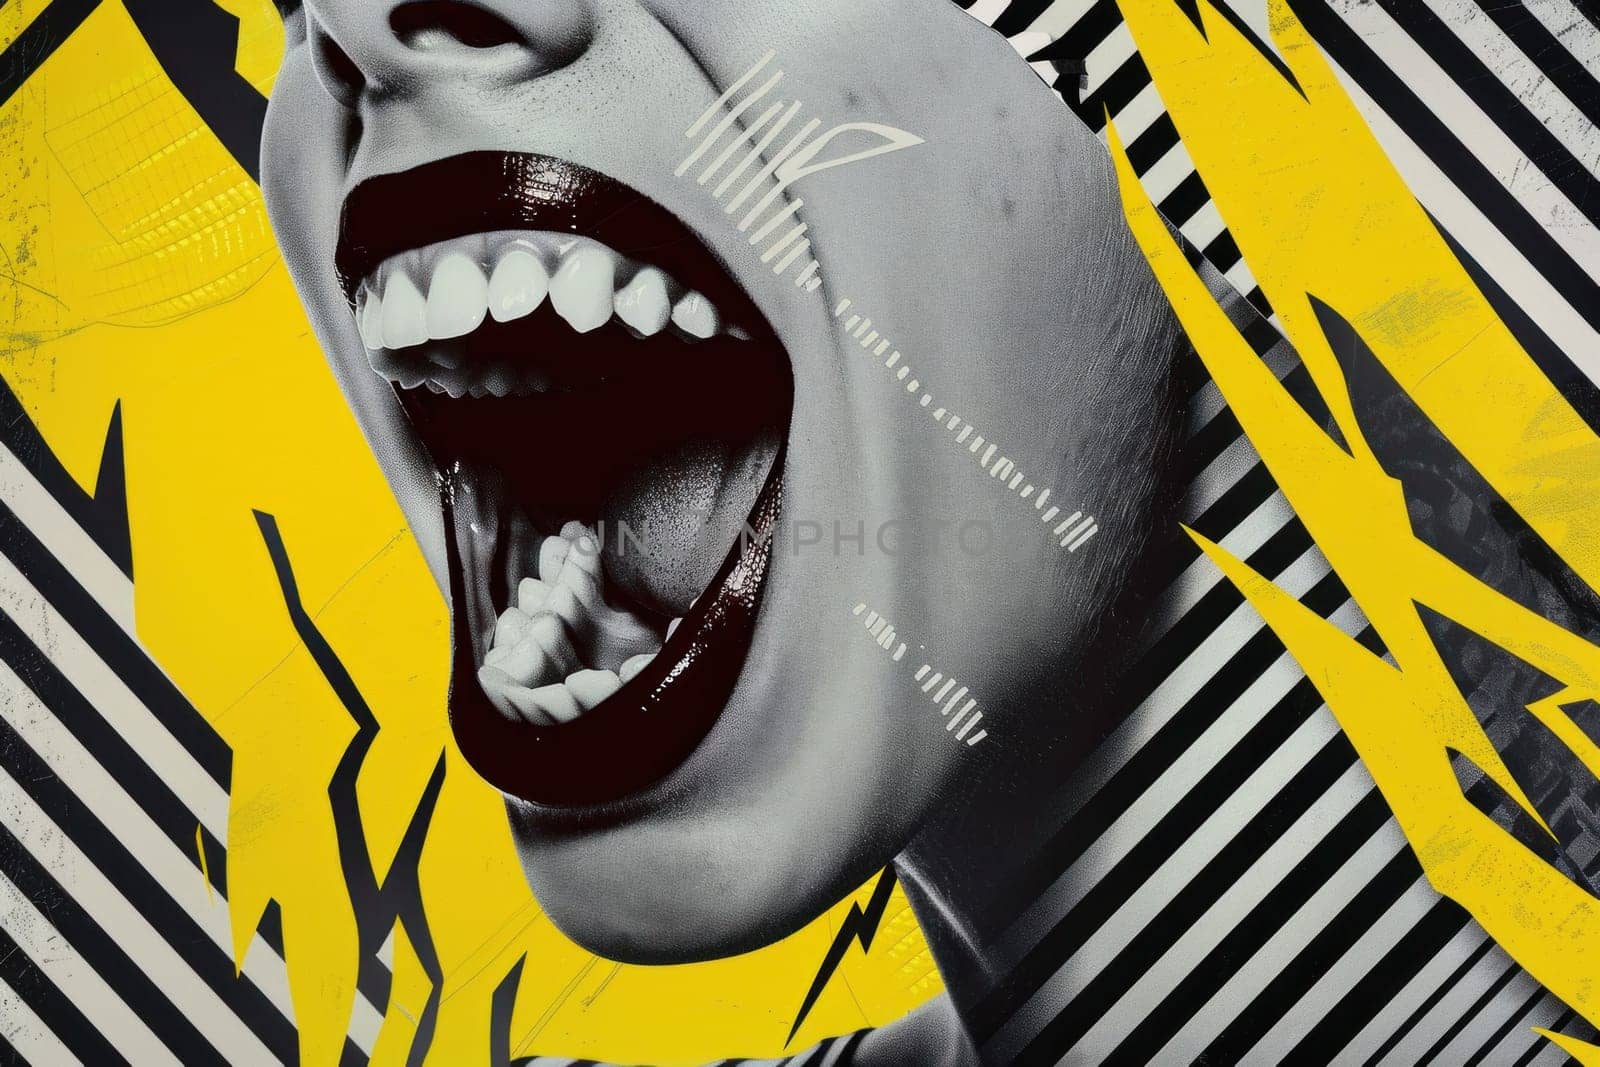 Surprised woman in front of vibrant yellow and black stripes background with open mouth